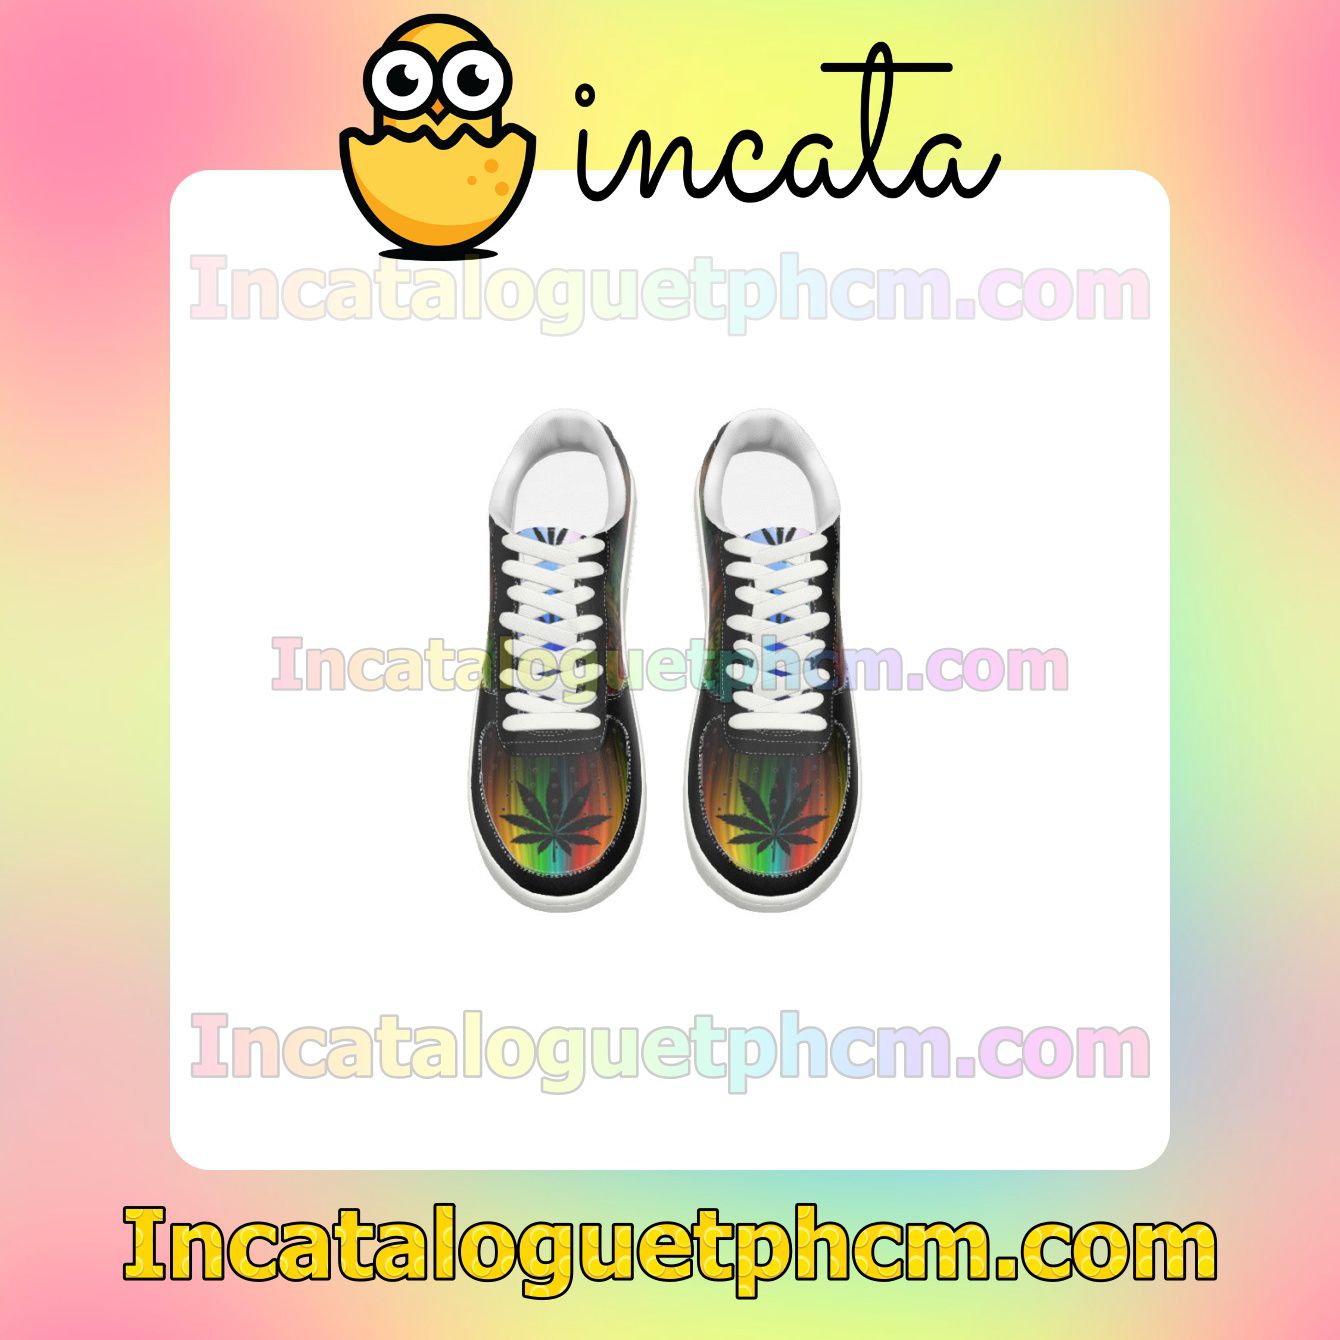 Great Quality Hologram UFO Cannabis Weed Nike Shoes Sneakers